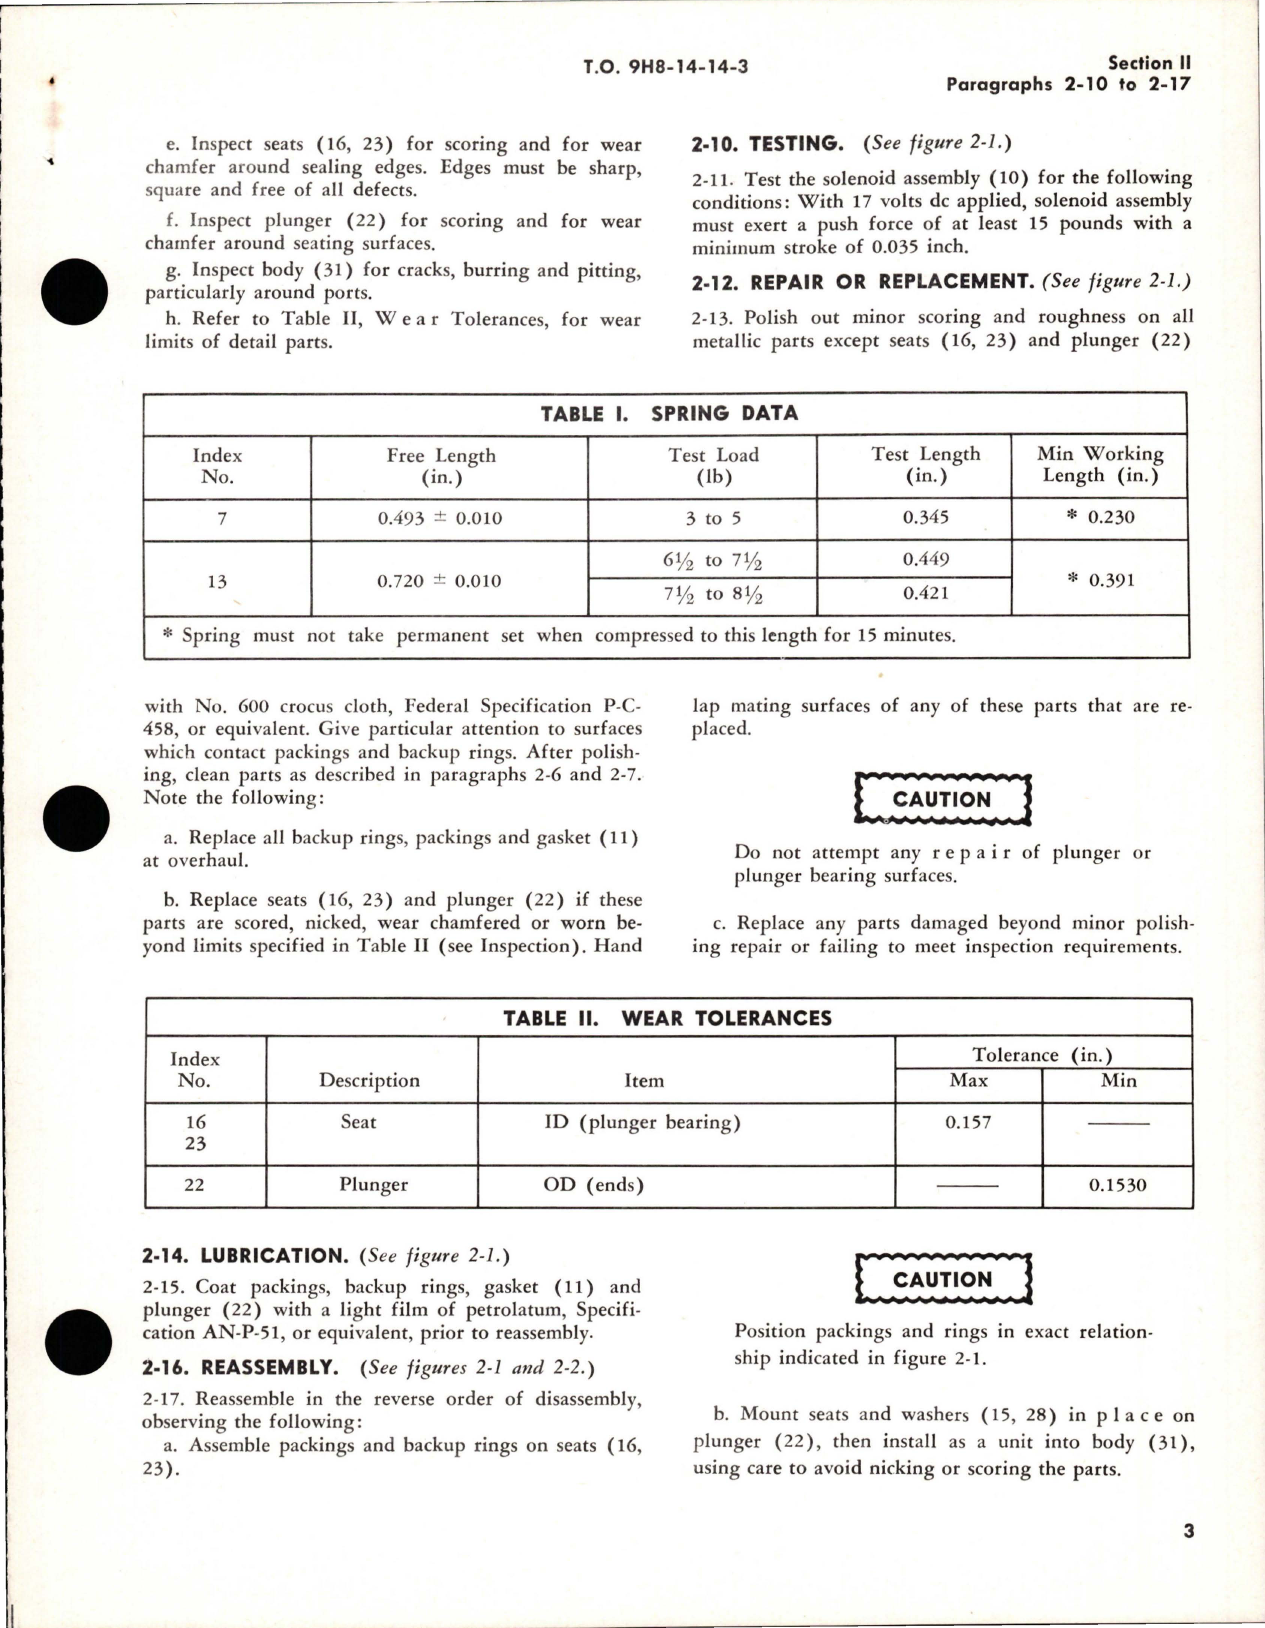 Sample page 7 from AirCorps Library document: Overhaul Instructions for Selector Valve Assemblies